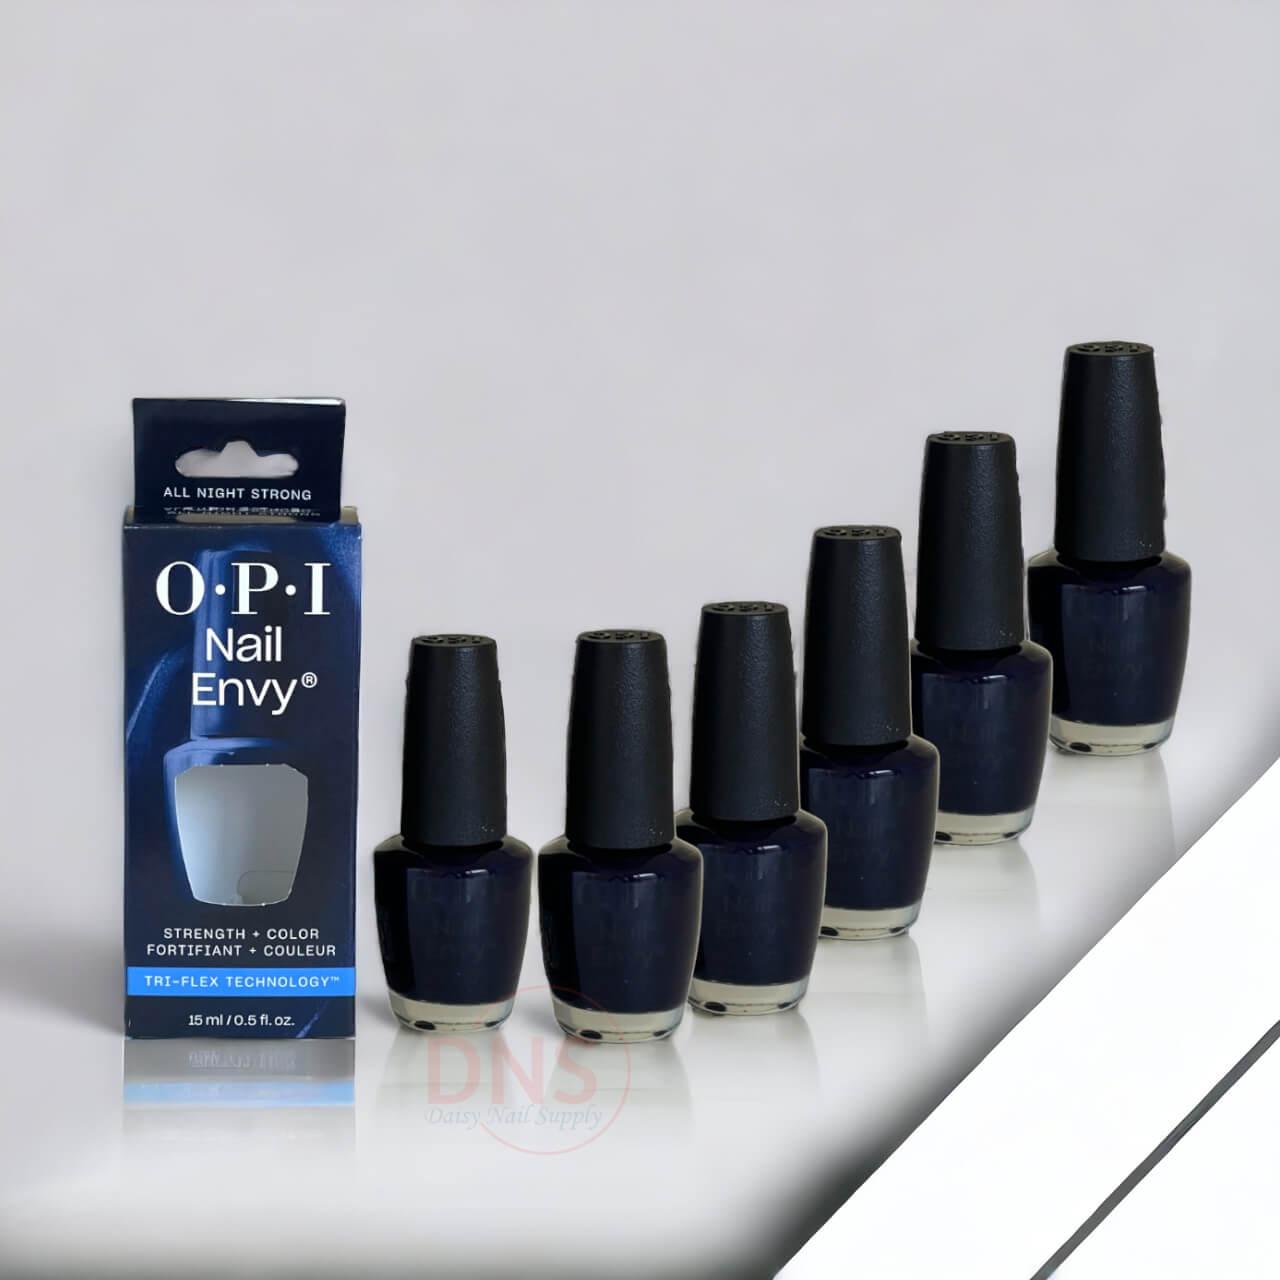 OPI Nail Envy Nail Strengthener 0.5 oz - All Night Strong NT227 (Pack of 6)